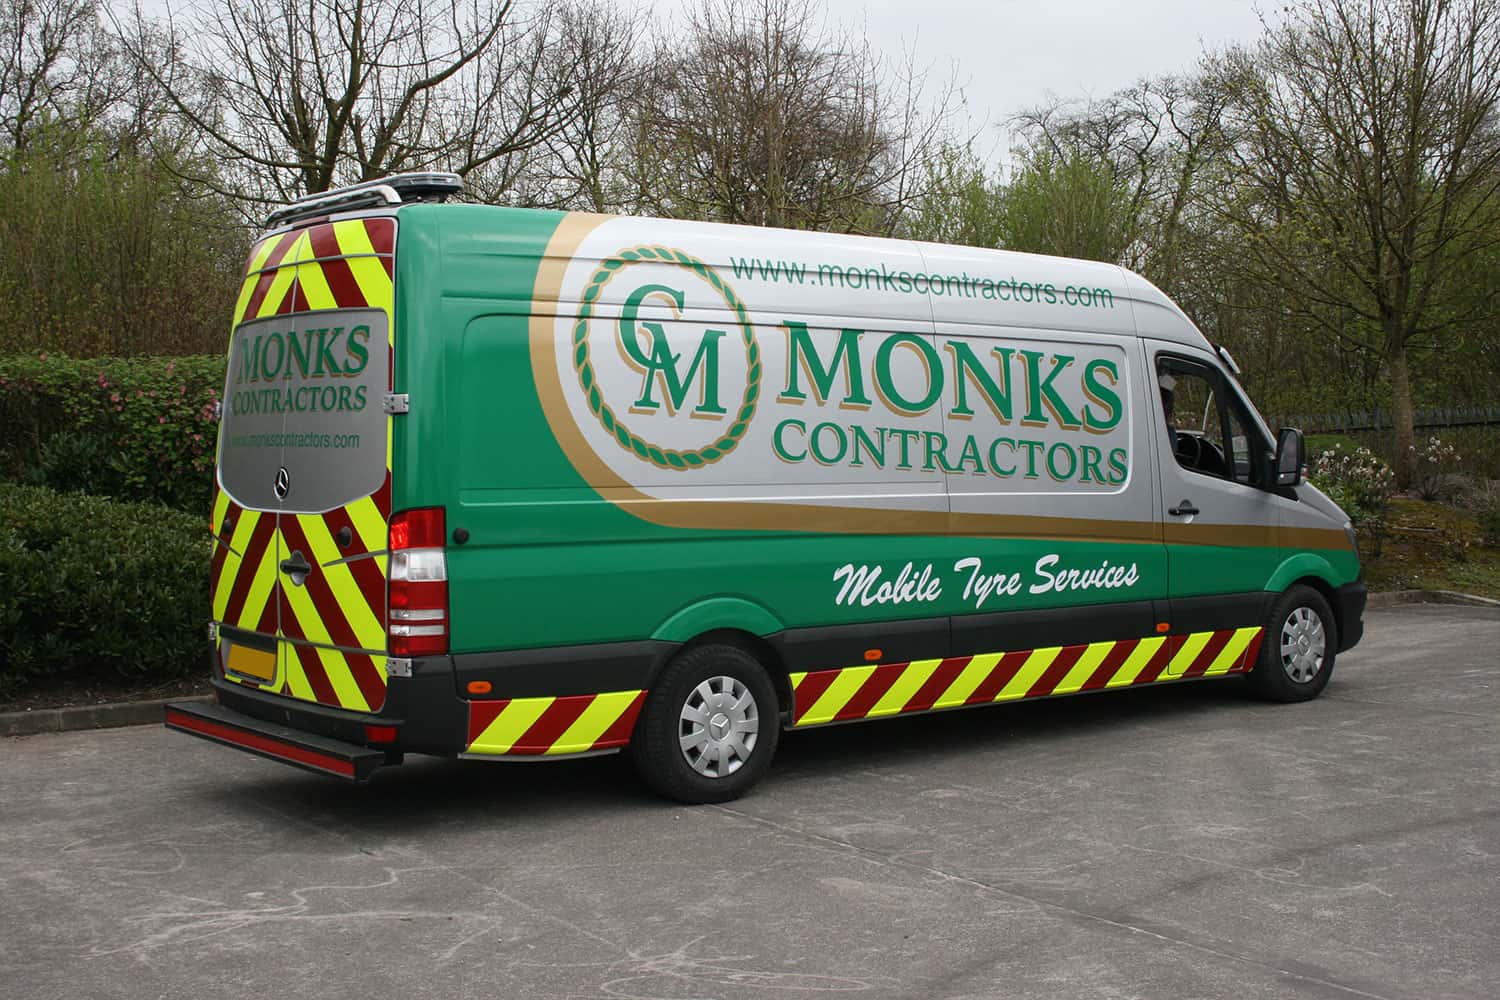 Monks Contractors - cut vinyl vehicle graphics with full chapter 8 kit to side.